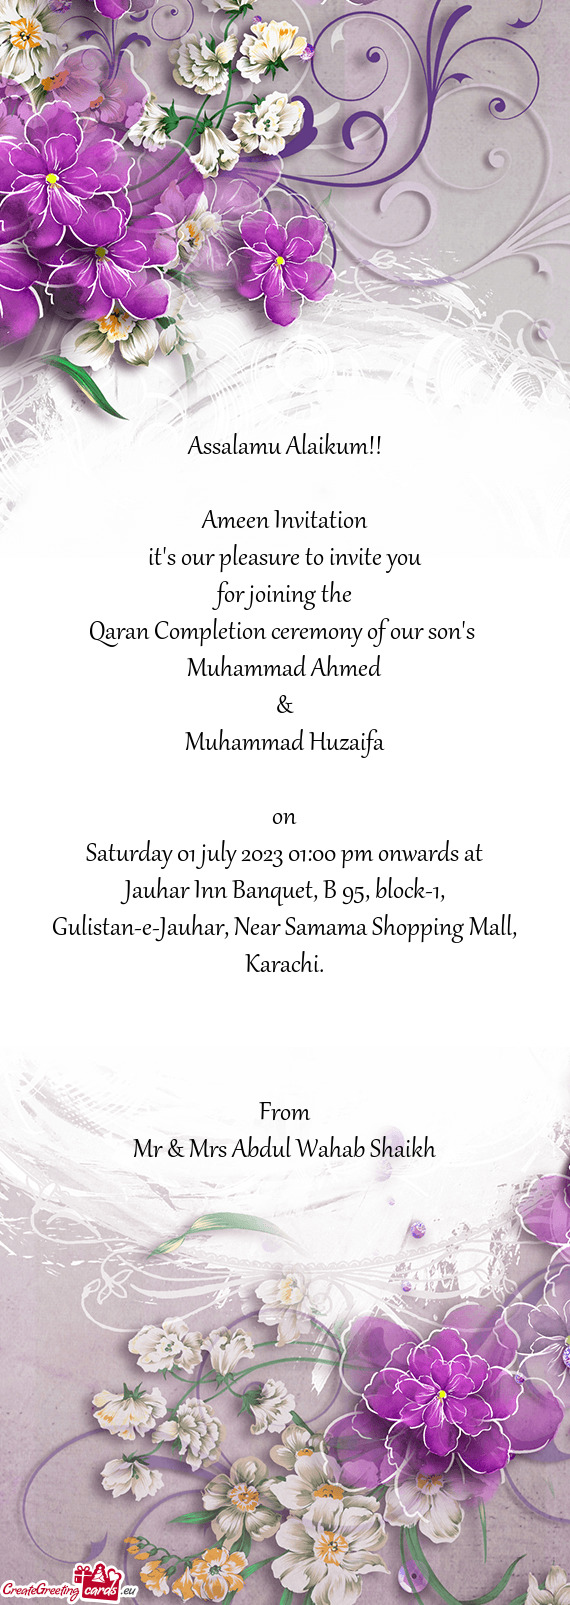 Qaran Completion ceremony of our son